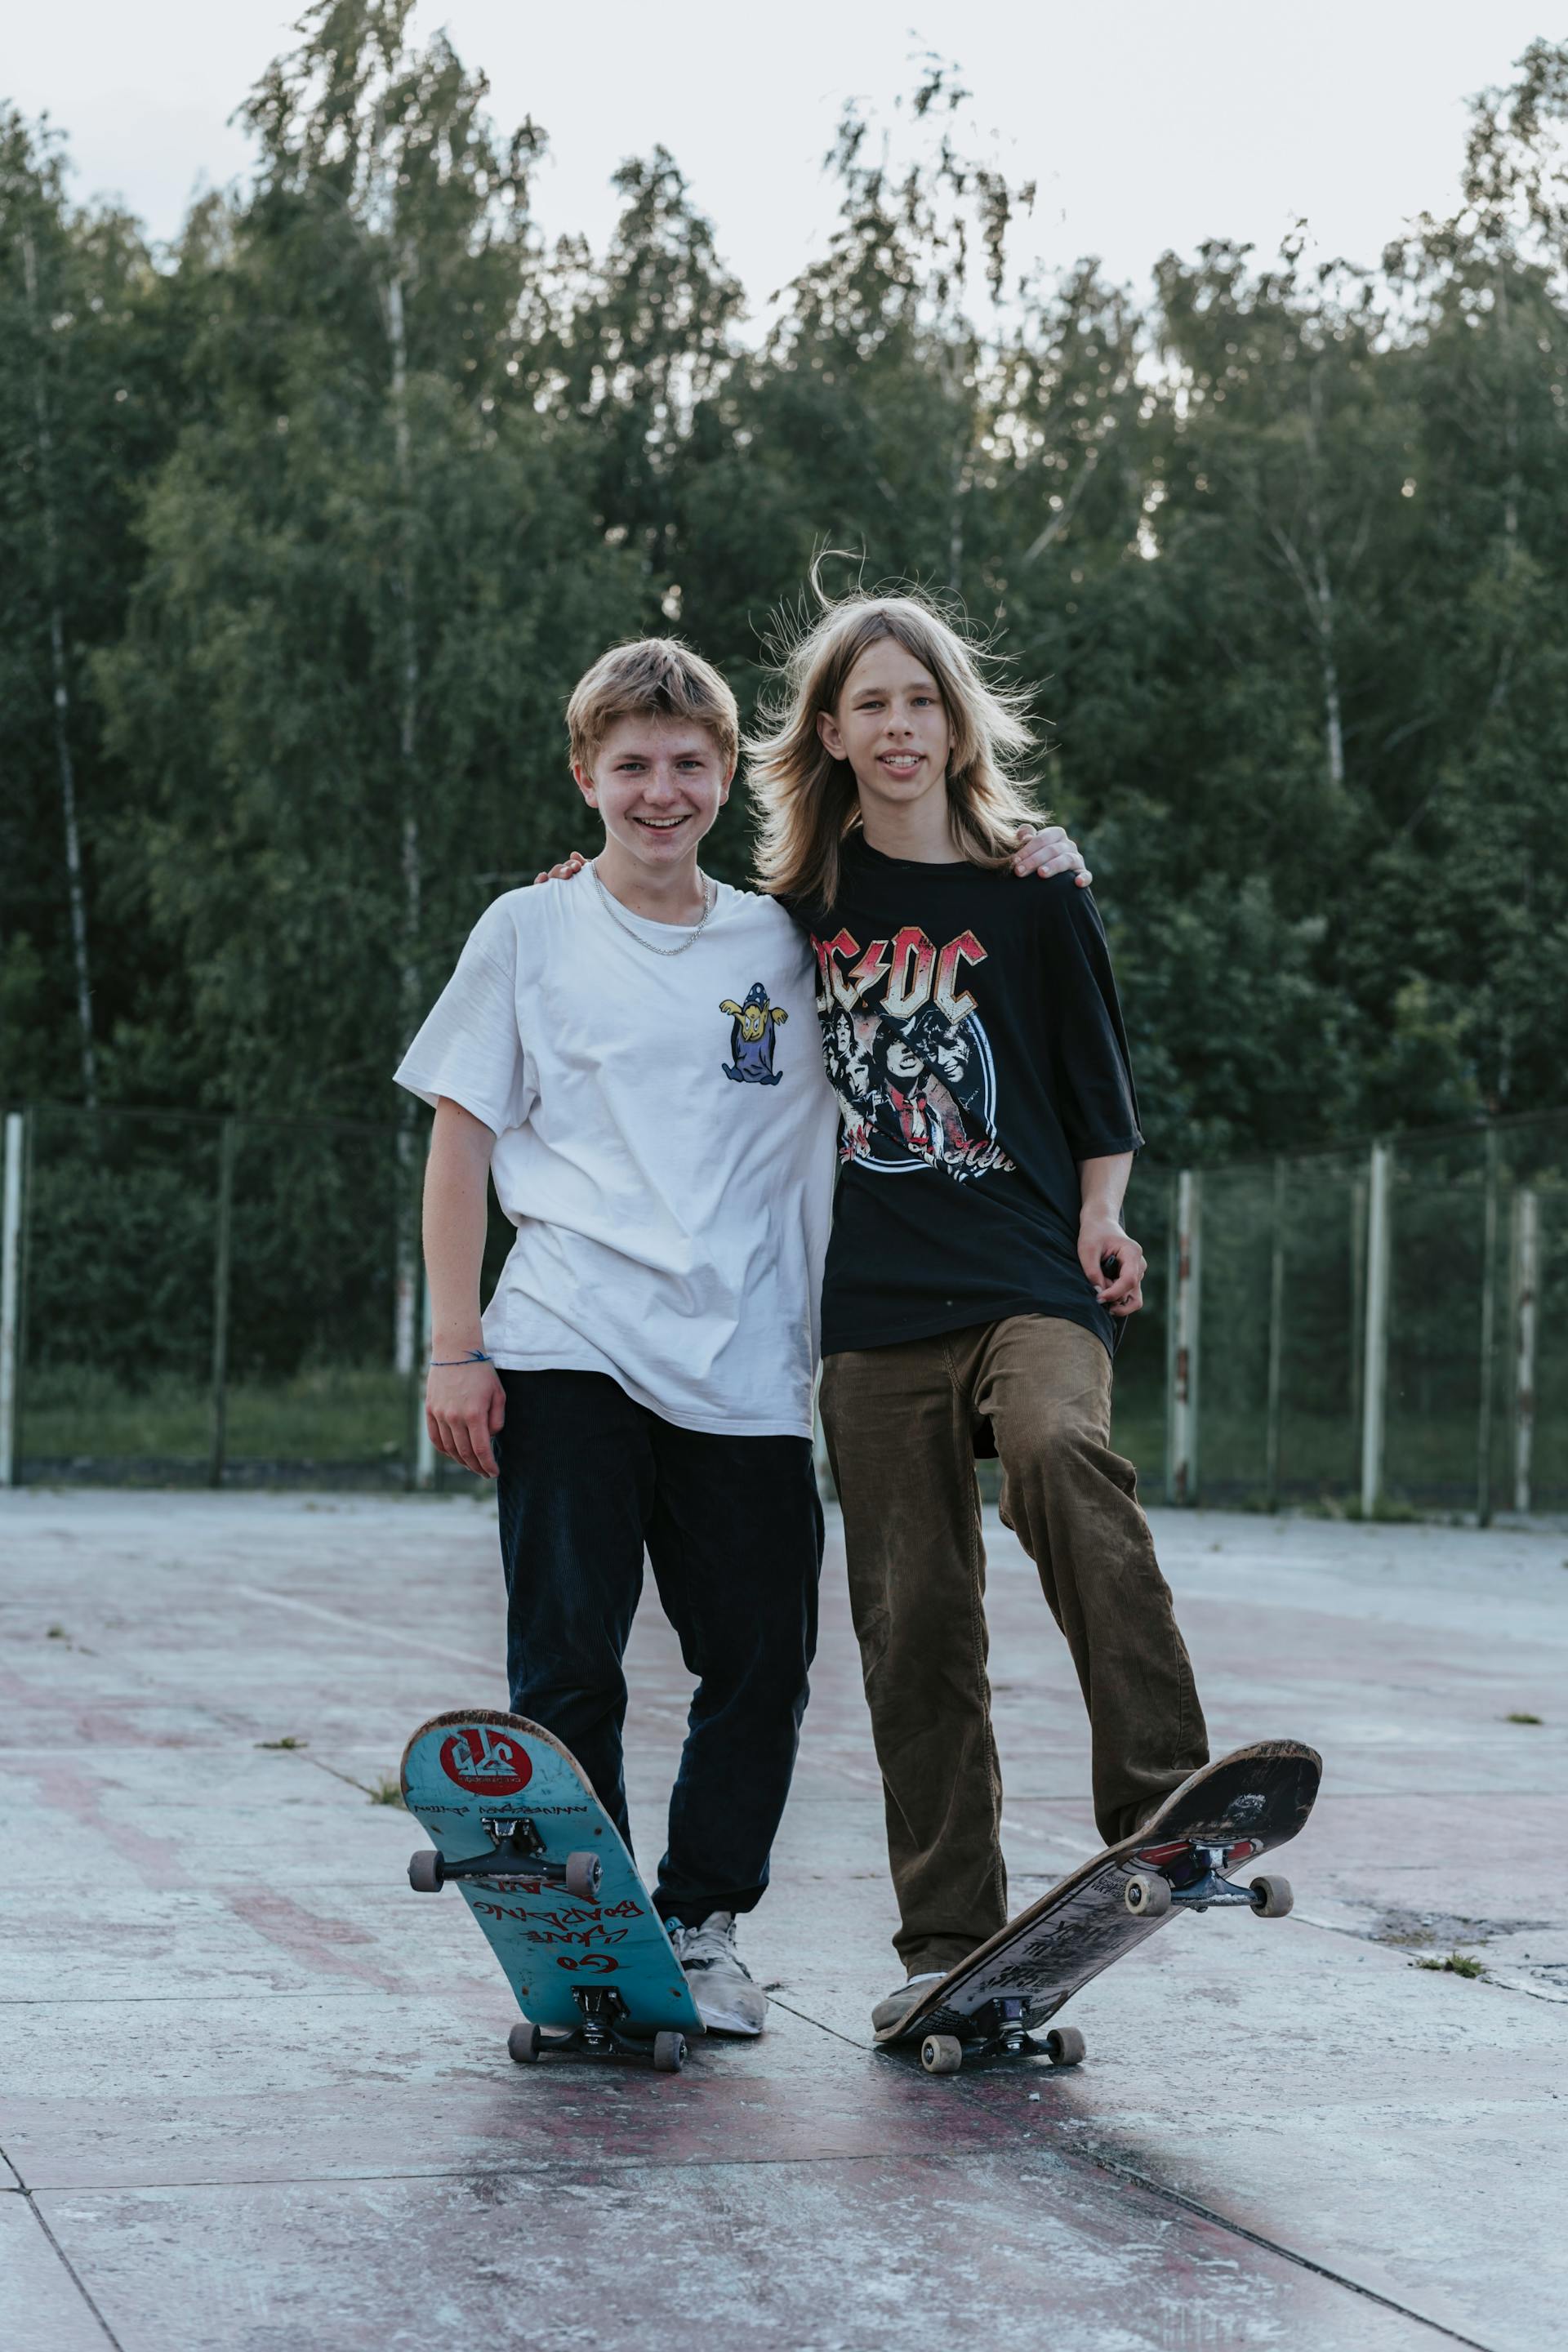 Two young boys with skateboards | Source: Pexels